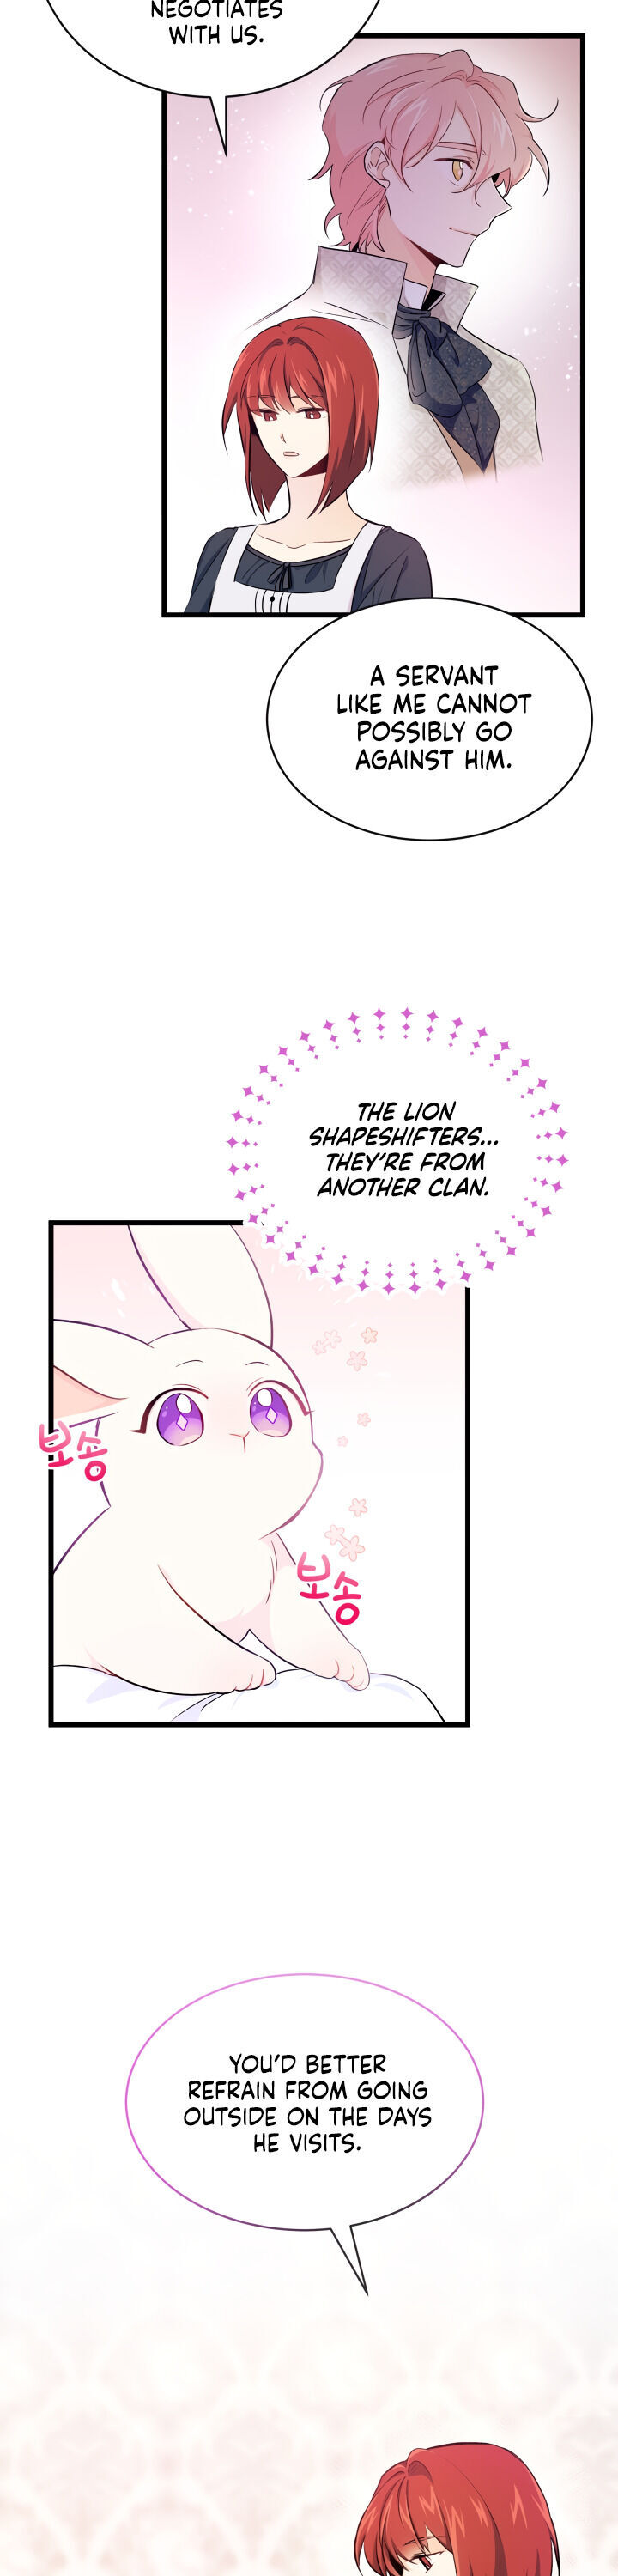 The Symbiotic Relationship Between A Rabbit and A Black Panther - Chapter 10 Page 2